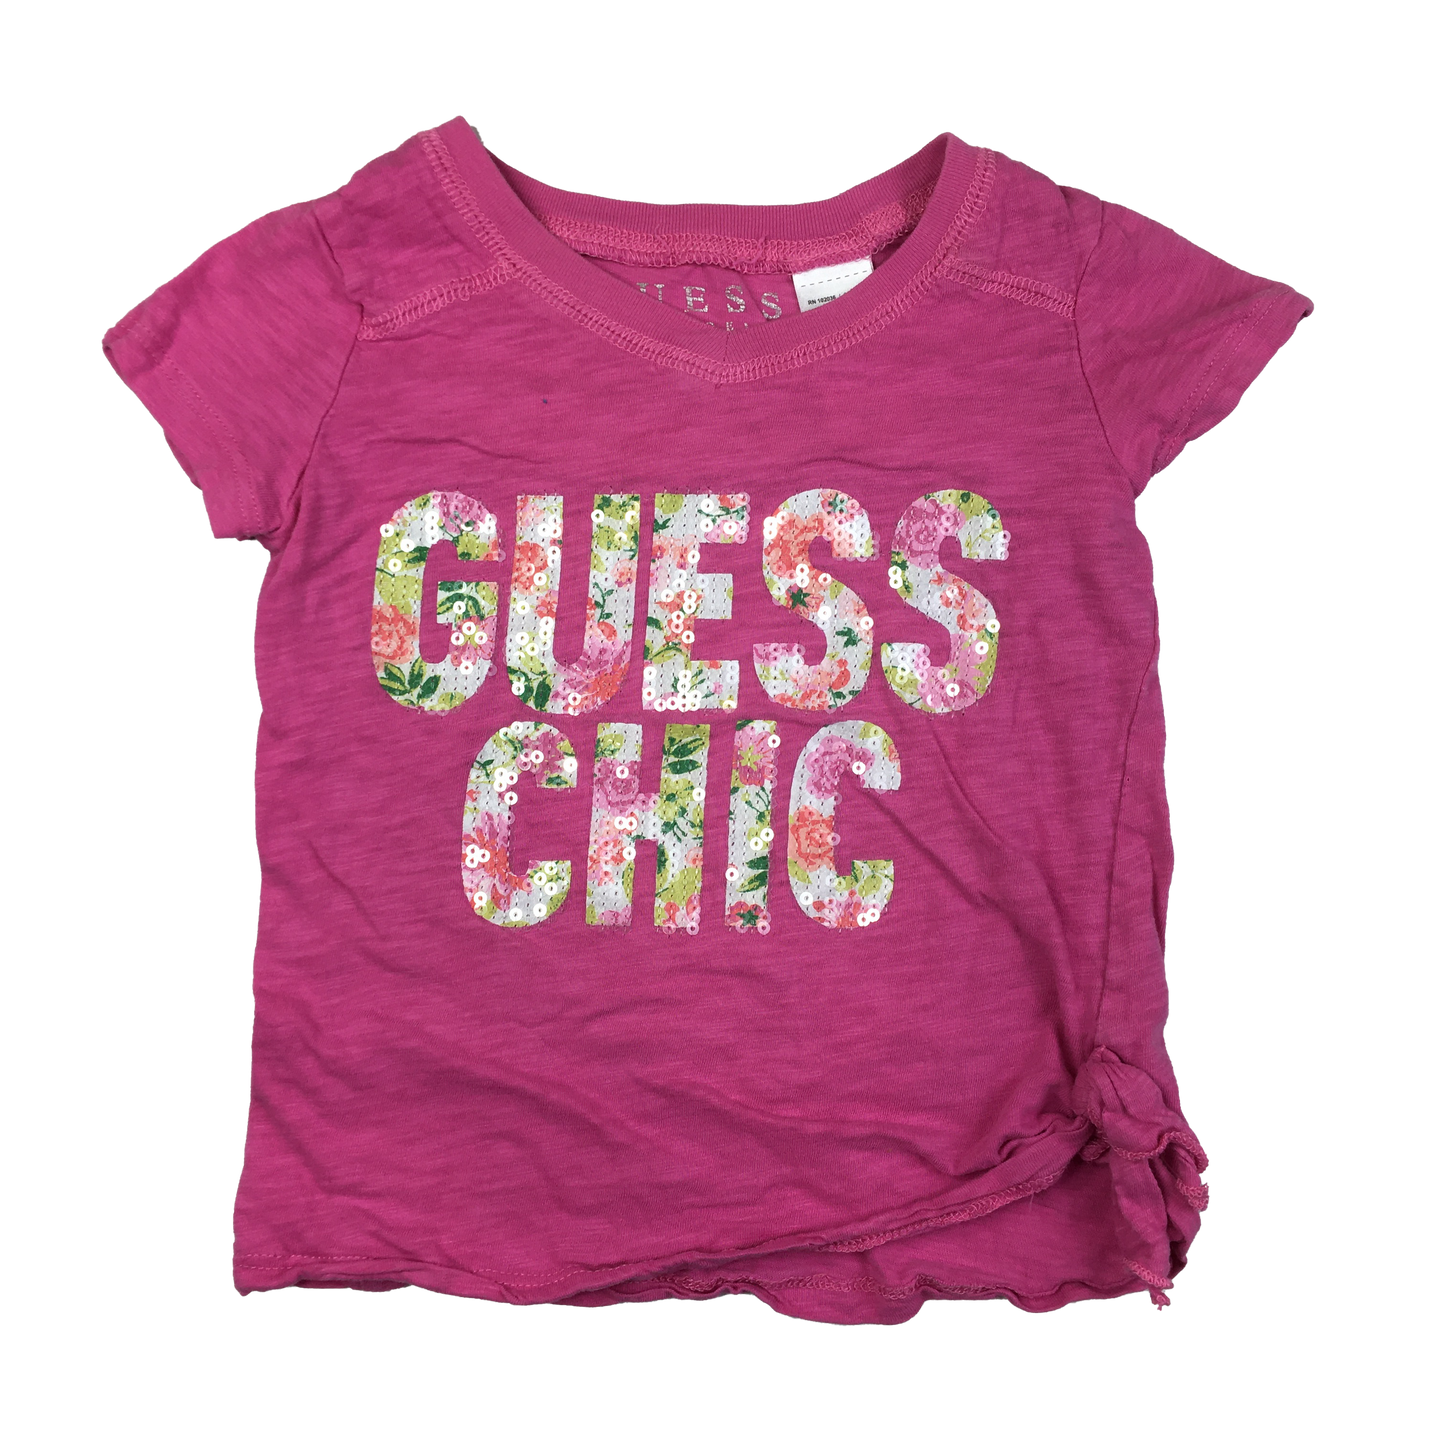 Guess Pink T-Shirt with "Guess Chic" in Sequins 4